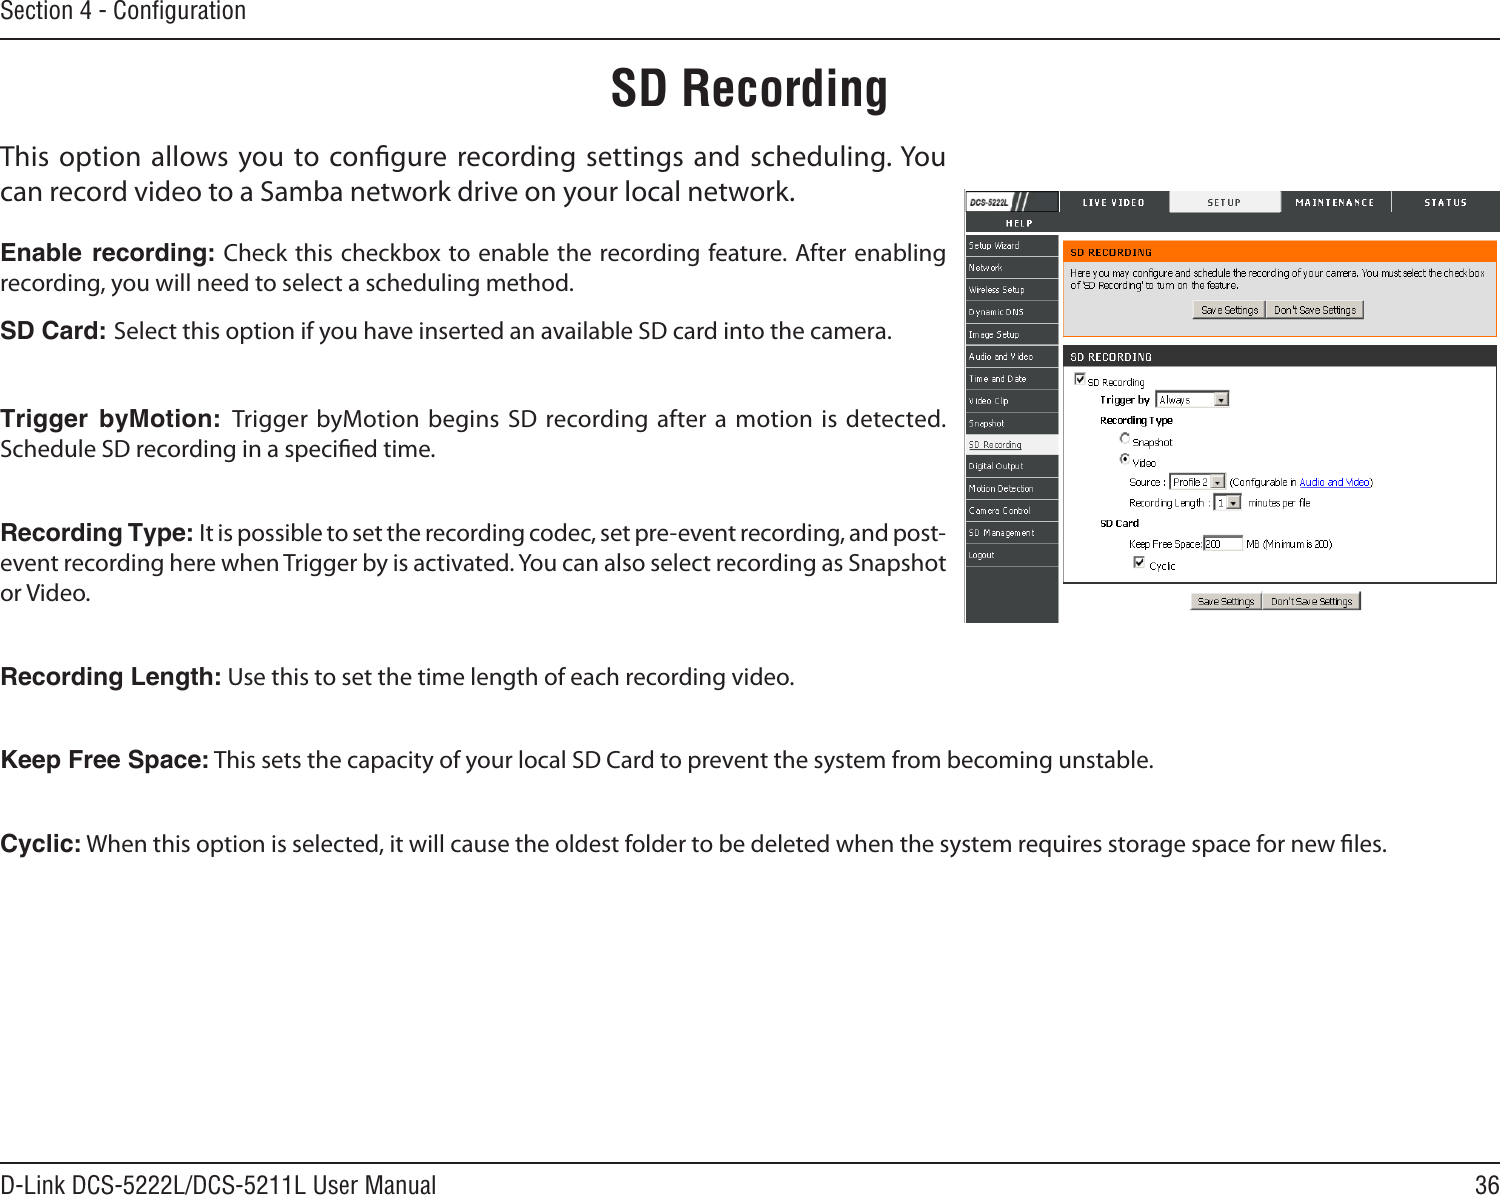 36D-Link DCS-5222L/DCS-5211L User ManualSection 4 - ConﬁgurationThis option allows you to congure recording settings  and  scheduling. You can record video to a Samba network drive on your local network.Enable  recording: Check this checkbox to enable the recording feature. After enabling recording, you will need to select a scheduling method.SD Card: Select this option if you have inserted an available SD card into the camera.Trigger  byMotion:  Trigger byMotion  begins SD recording after a motion is detected. Schedule SD recording in a specied time. Recording Type: It is possible to set the recording codec, set pre-event recording, and post-event recording here when Trigger by is activated. You can also select recording as Snapshot or Video.Recording Length: Use this to set the time length of each recording video.Keep Free Space: This sets the capacity of your local SD Card to prevent the system from becoming unstable.Cyclic: When this option is selected, it will cause the oldest folder to be deleted when the system requires storage space for new les.SD Recording